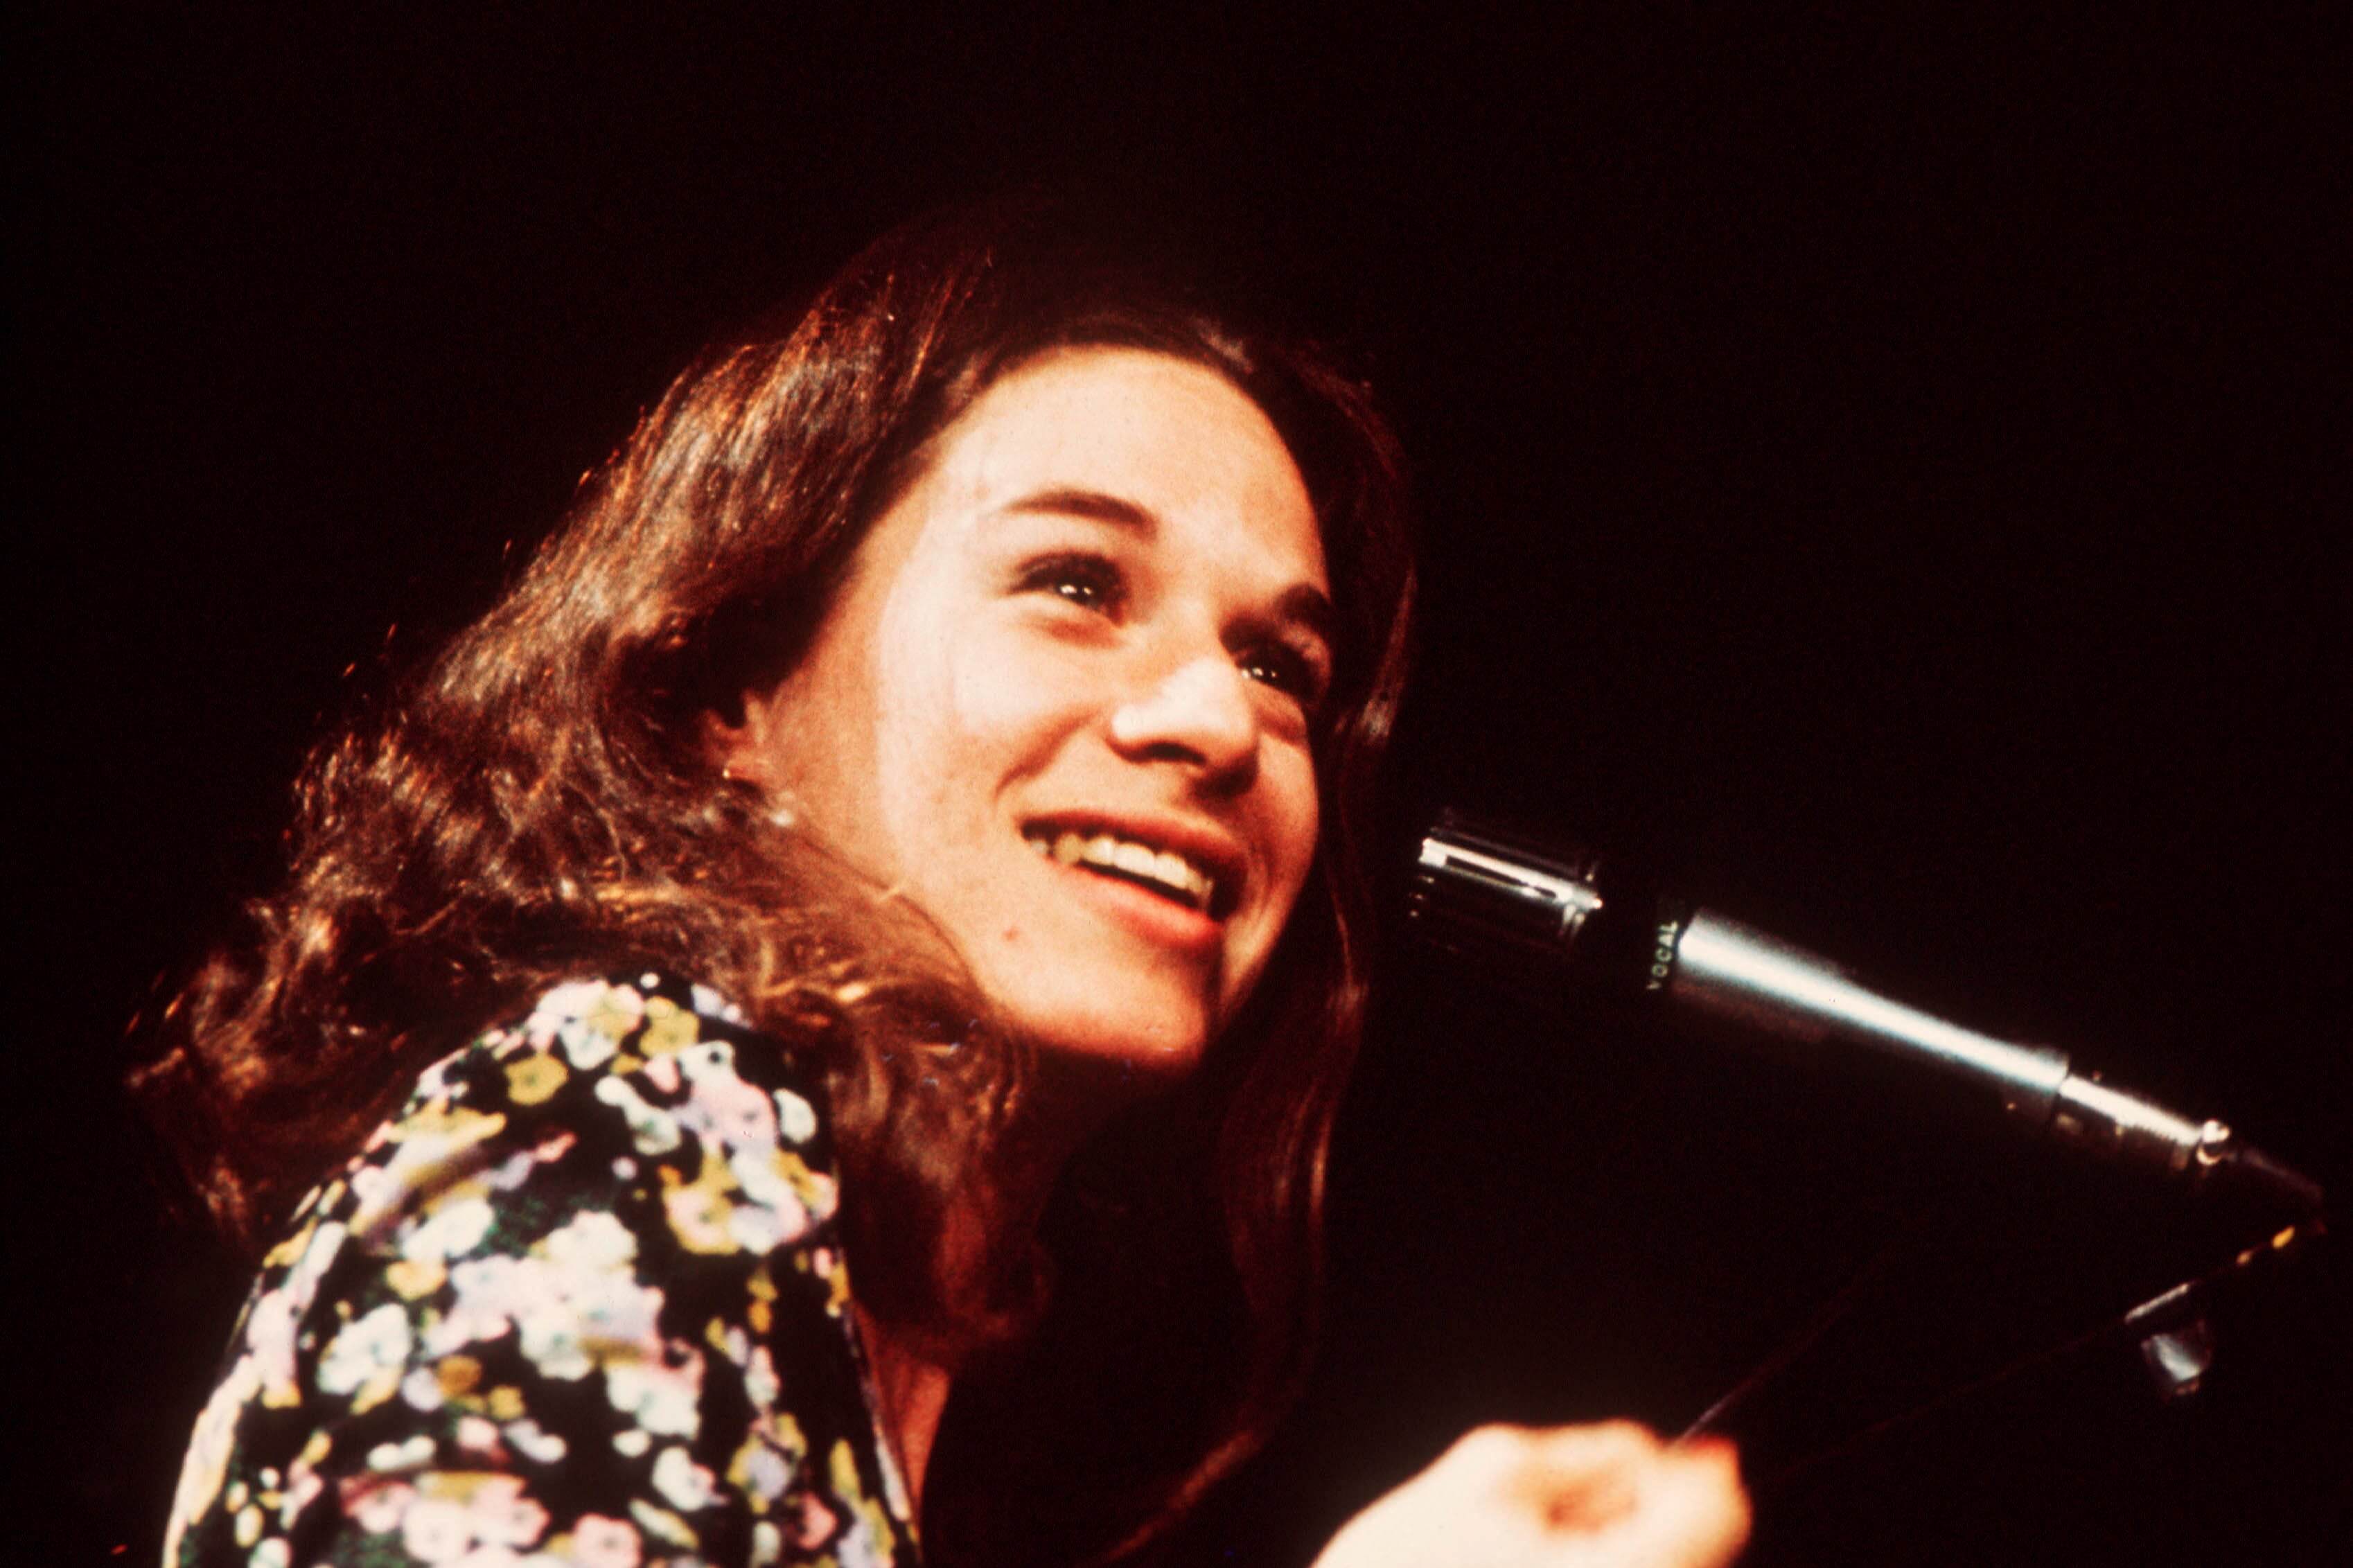 Carole King, writer of famous girl group songs, with a microphone